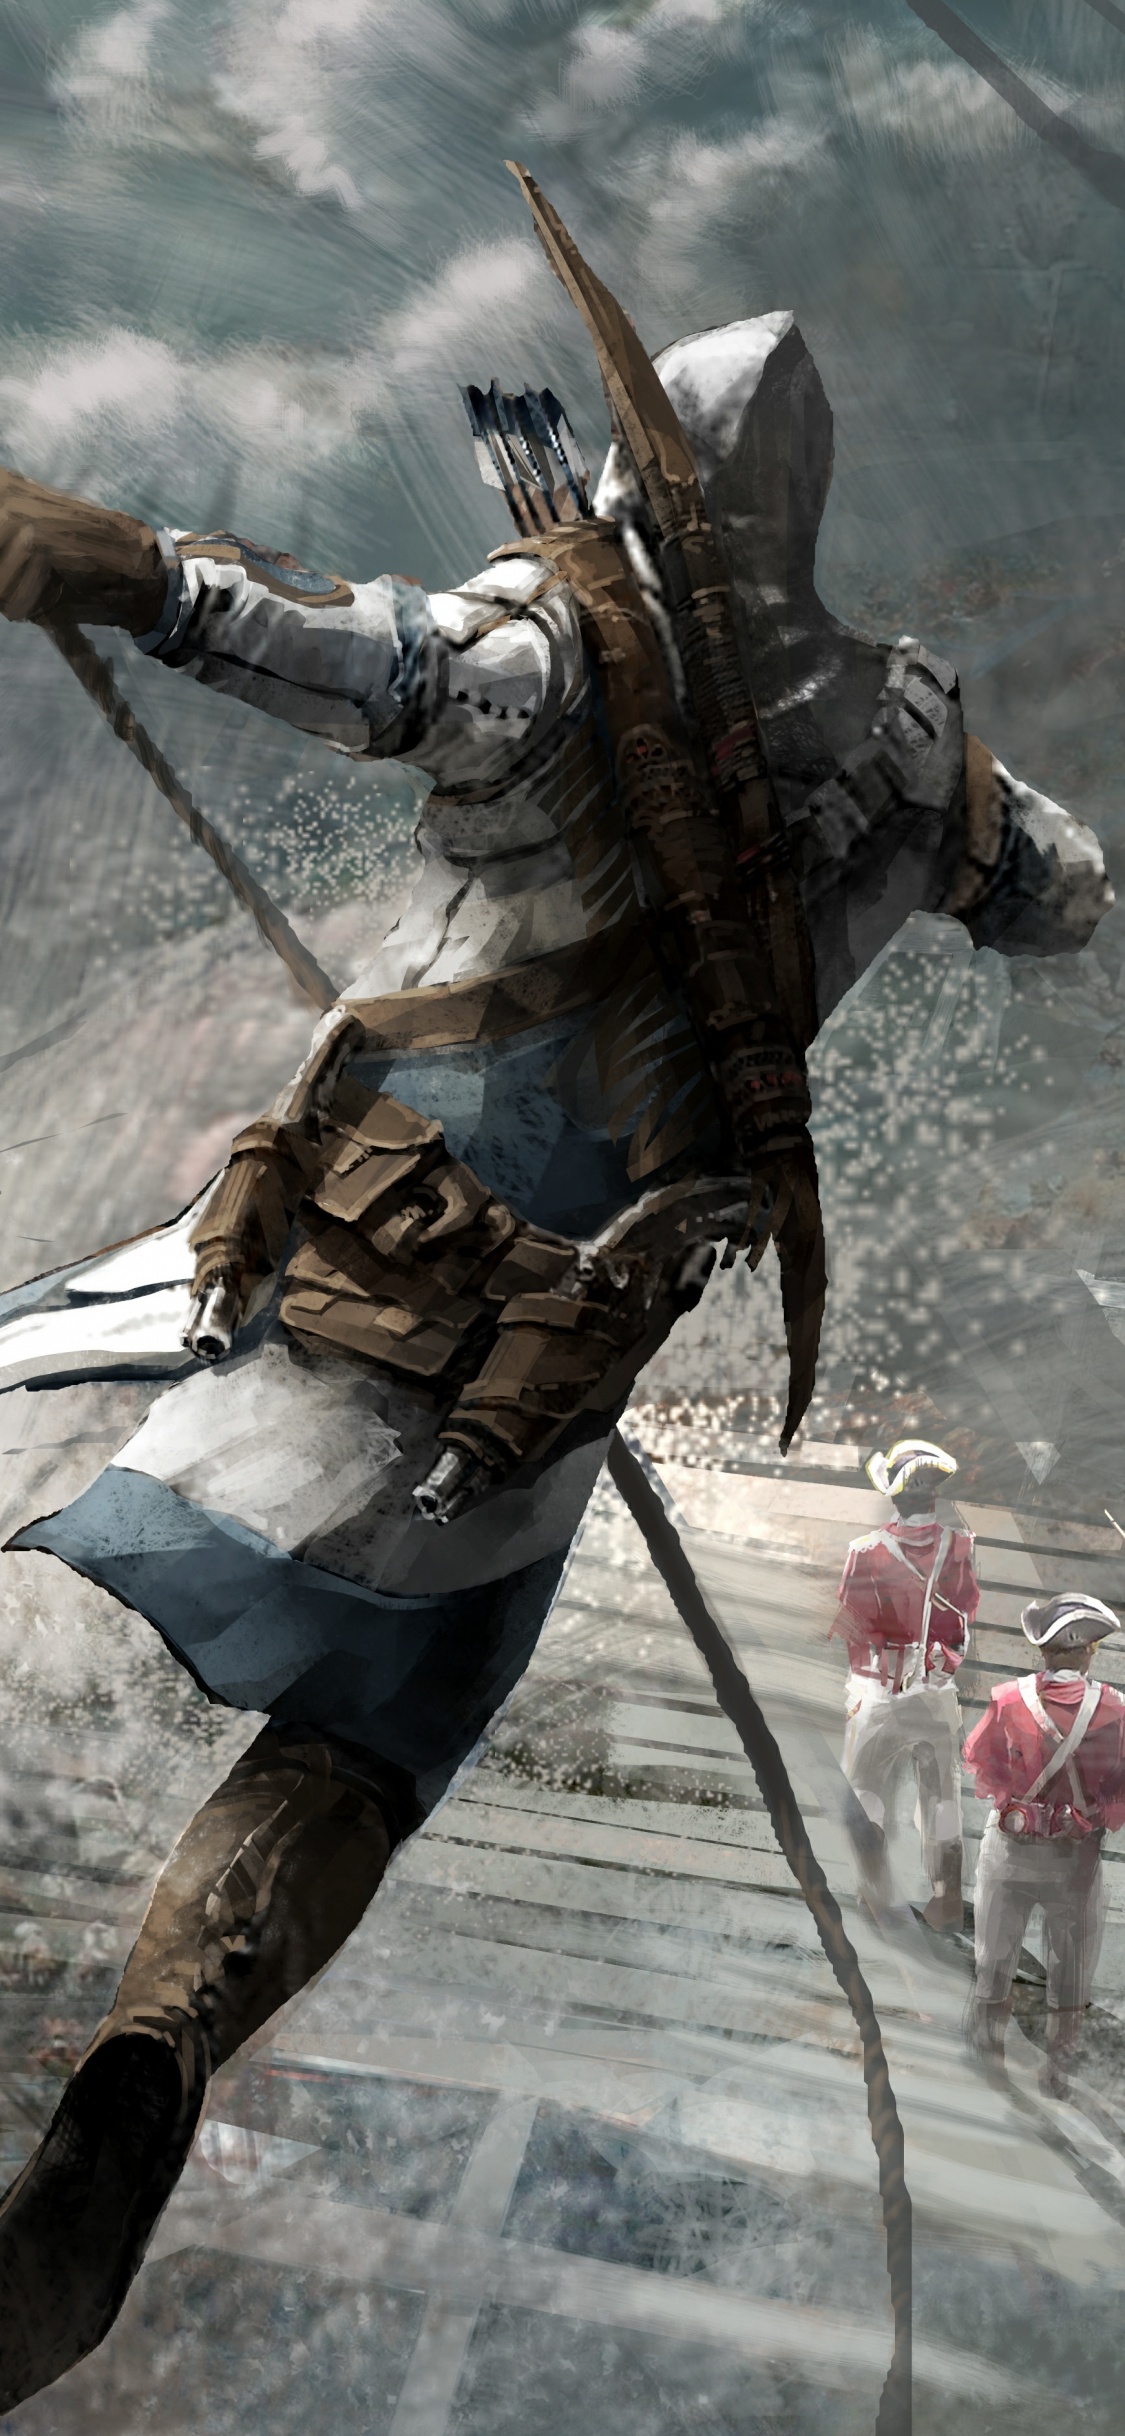 Assassins Creed III, Assassins Creed, Ezio Auditore, Connor Kenway, Ubisoft. Wallpaper in 1125x2436 Resolution